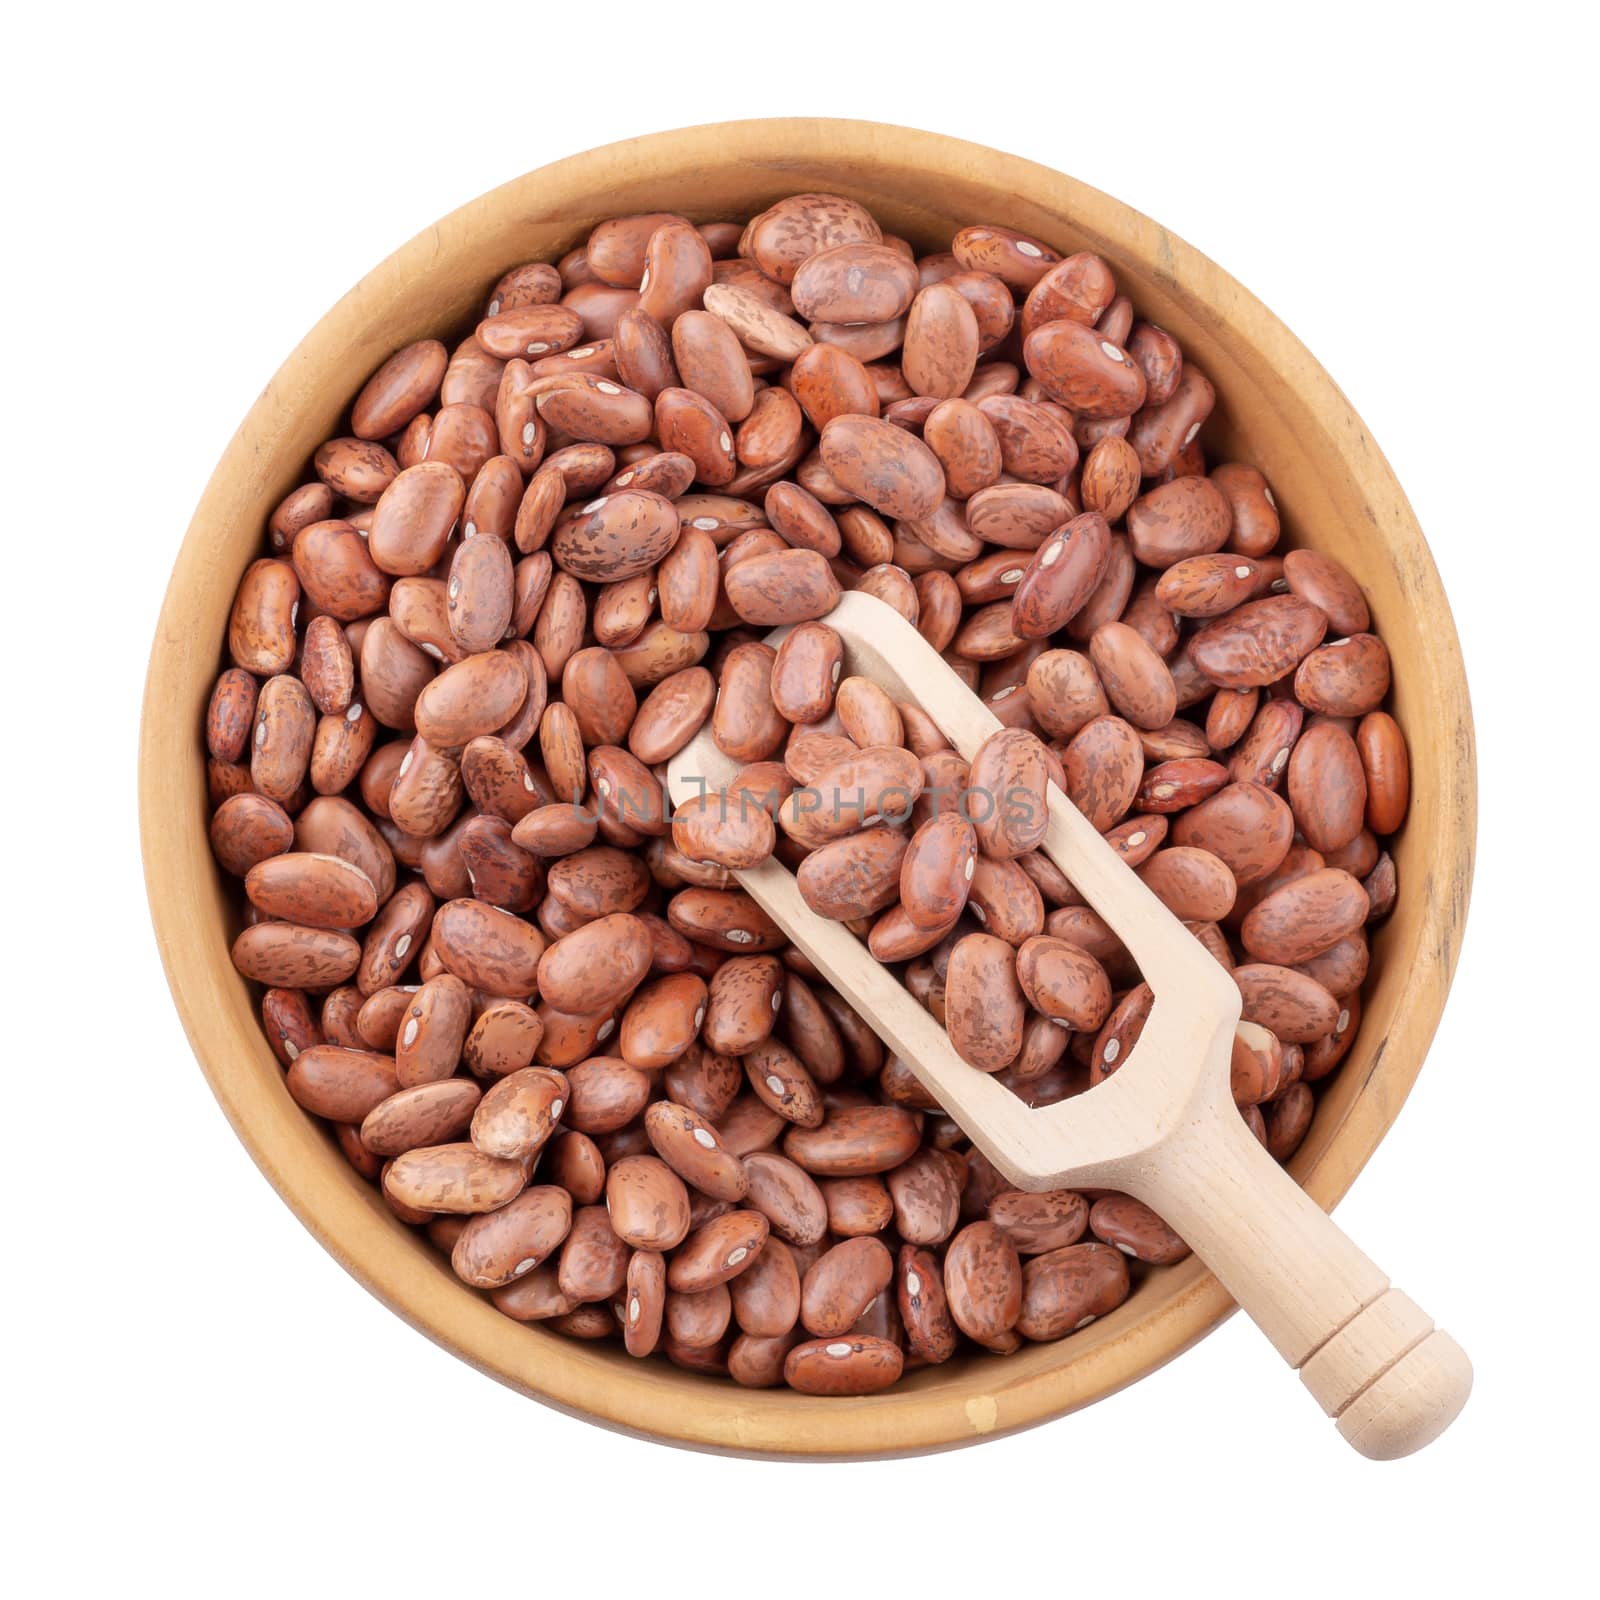 pinto beans in a wooden bowl isolated on a white background.